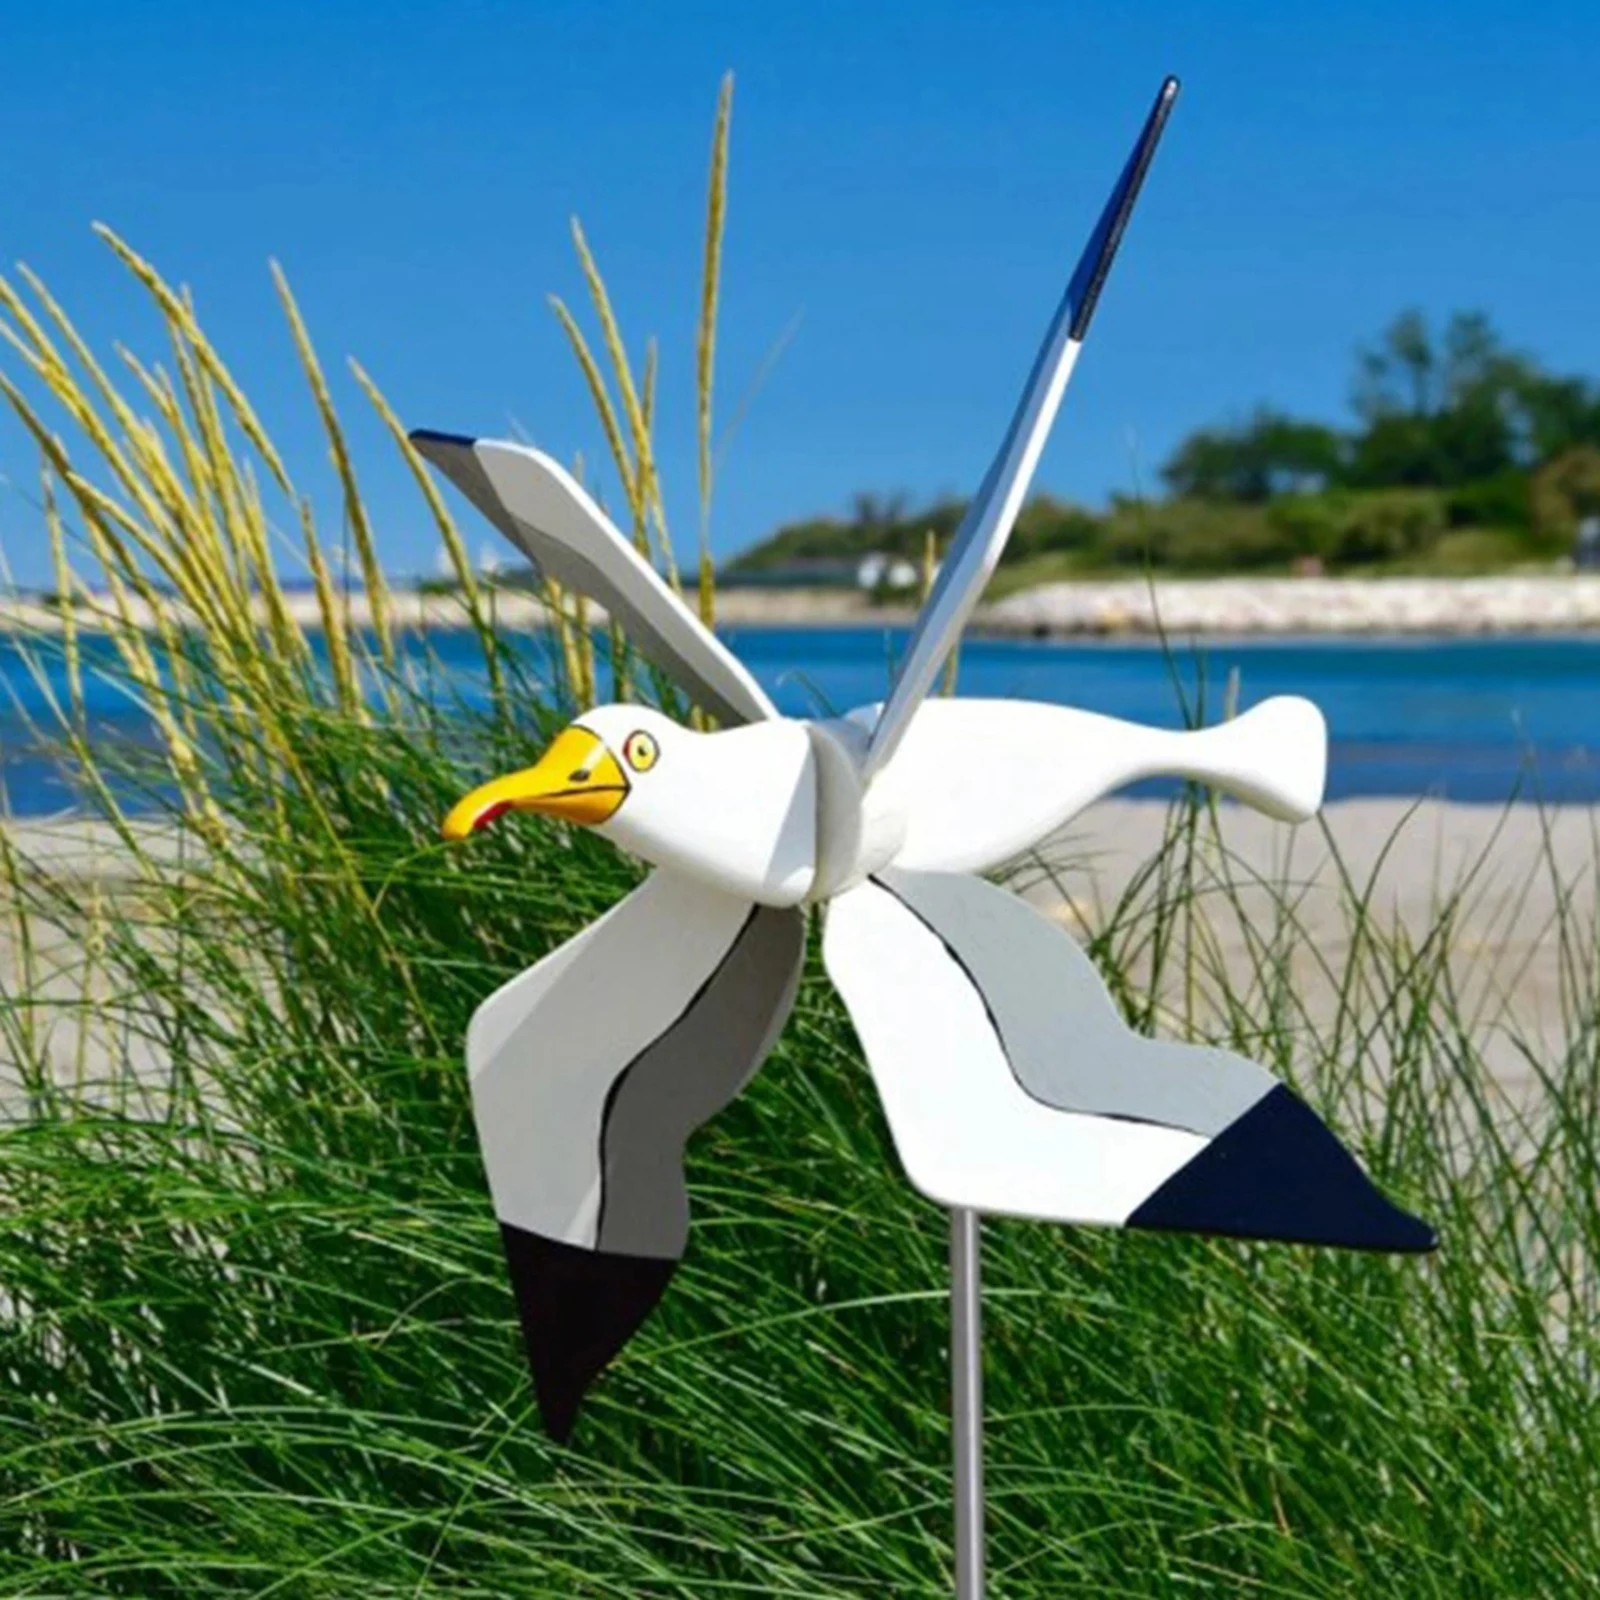 Funny Whirligig  Series Windmill Ornaments Seagull Windmill Holiday Gift Garden Decoration